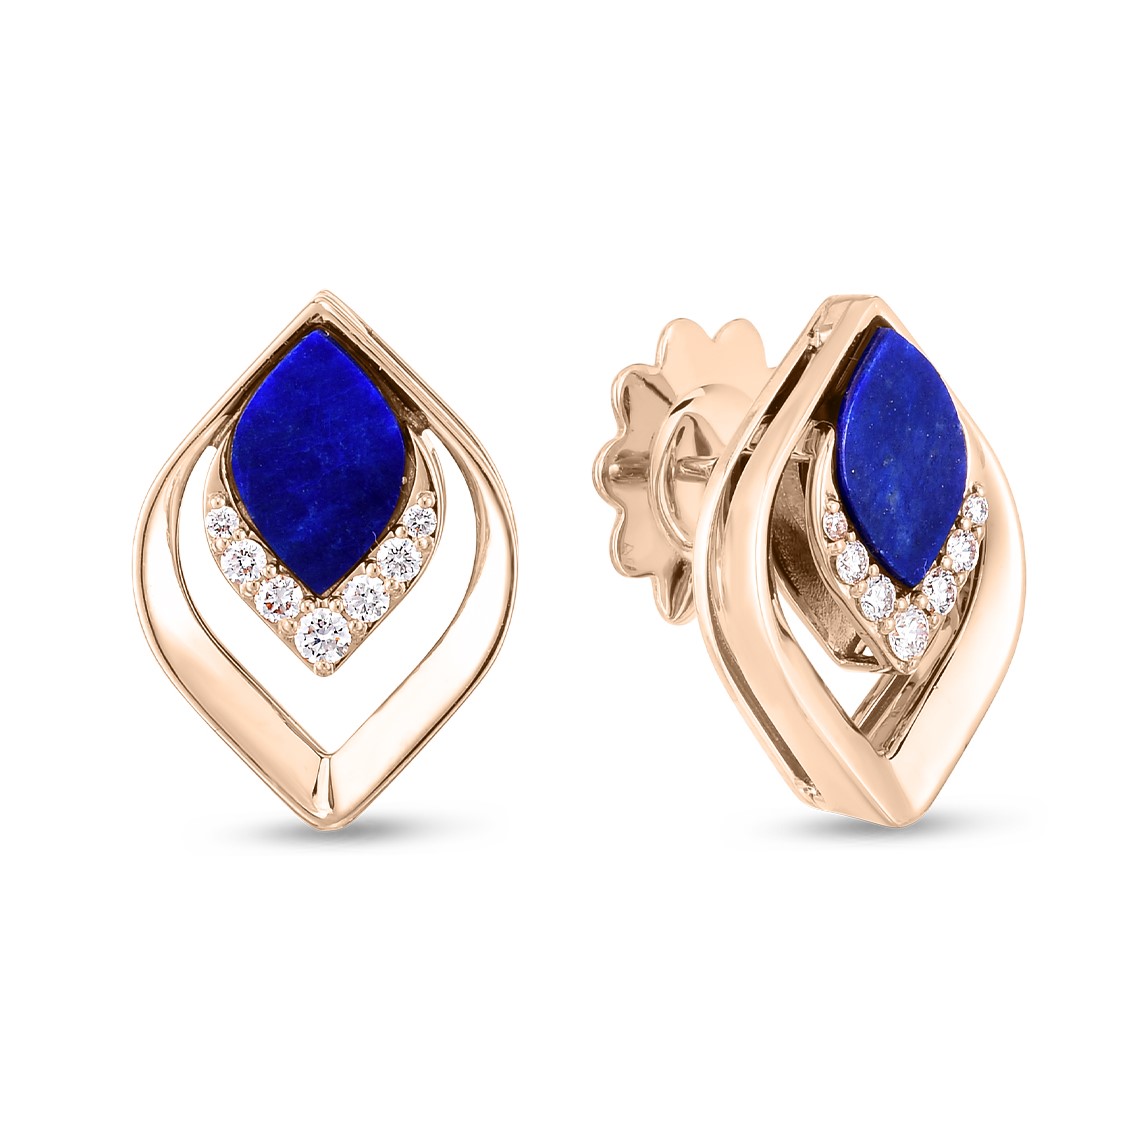 Roberto Coin 18K Rose Gold Earrings with 2 Lapis 1.68 Tcw & 14 Round Diamonds 0.15 Tcw G-H SI